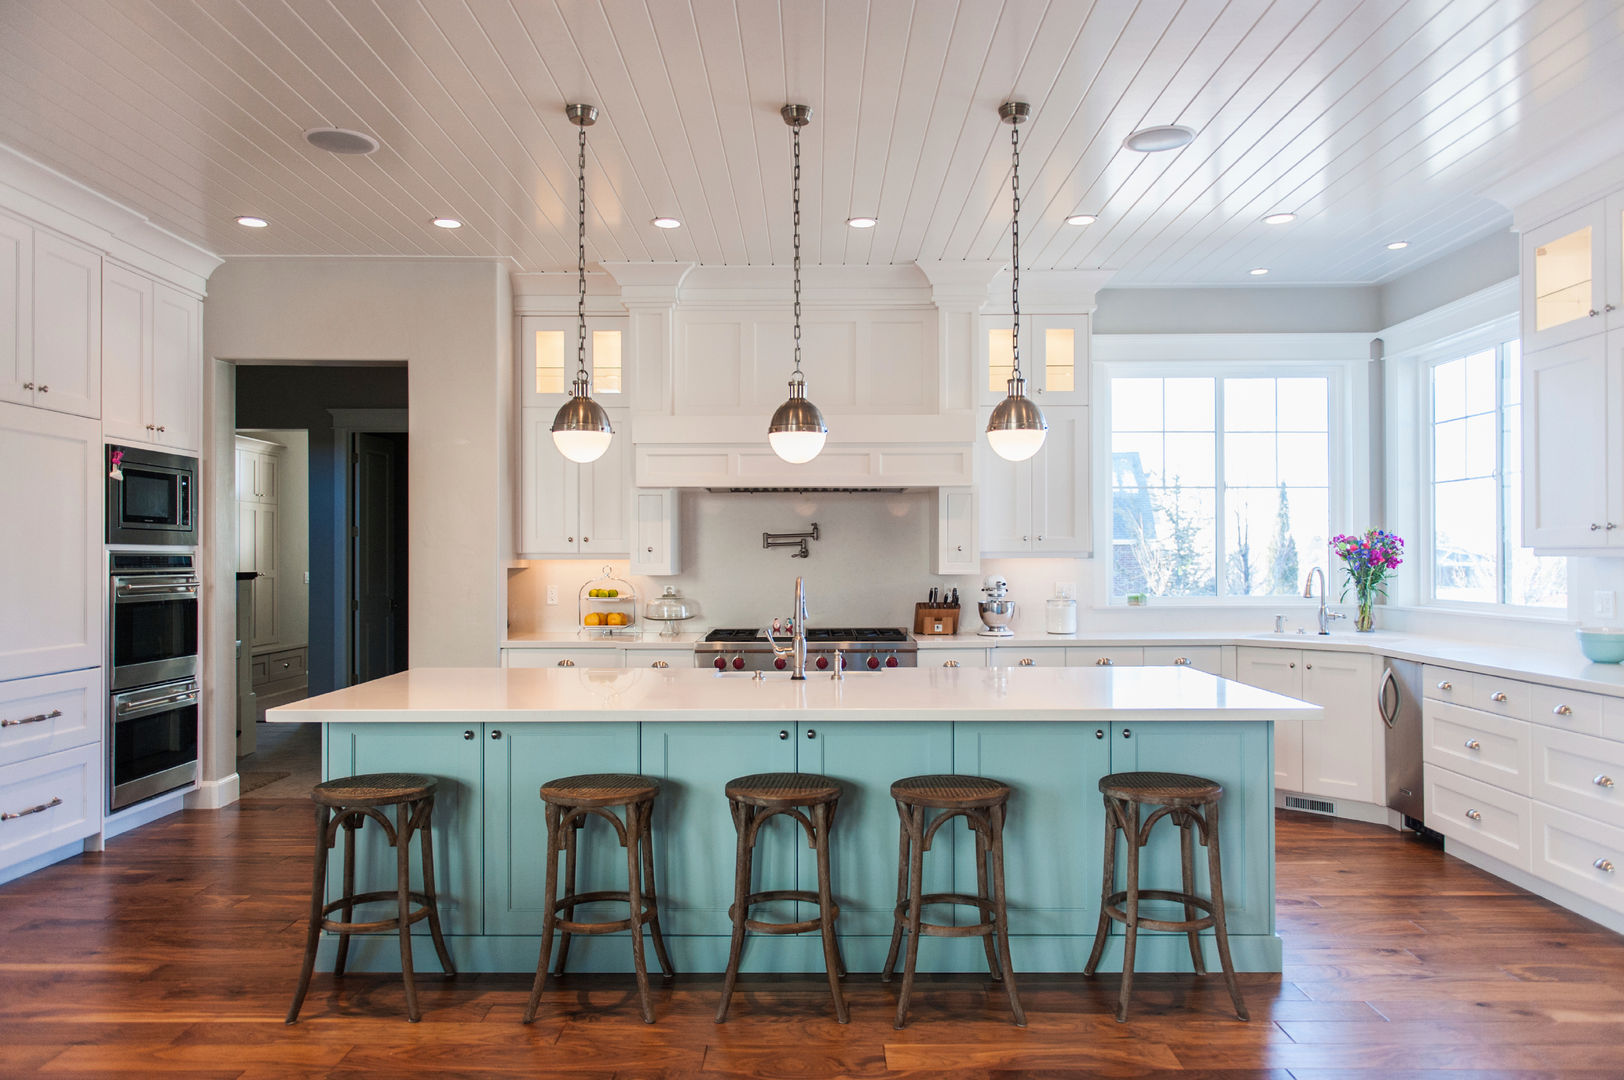 Modern Country-Style Kitchen Gracious Luxury Interiors Kitchen Country,Kitchen,Kitchen Island,Pastel,Blue,Barn,Barn Conversion